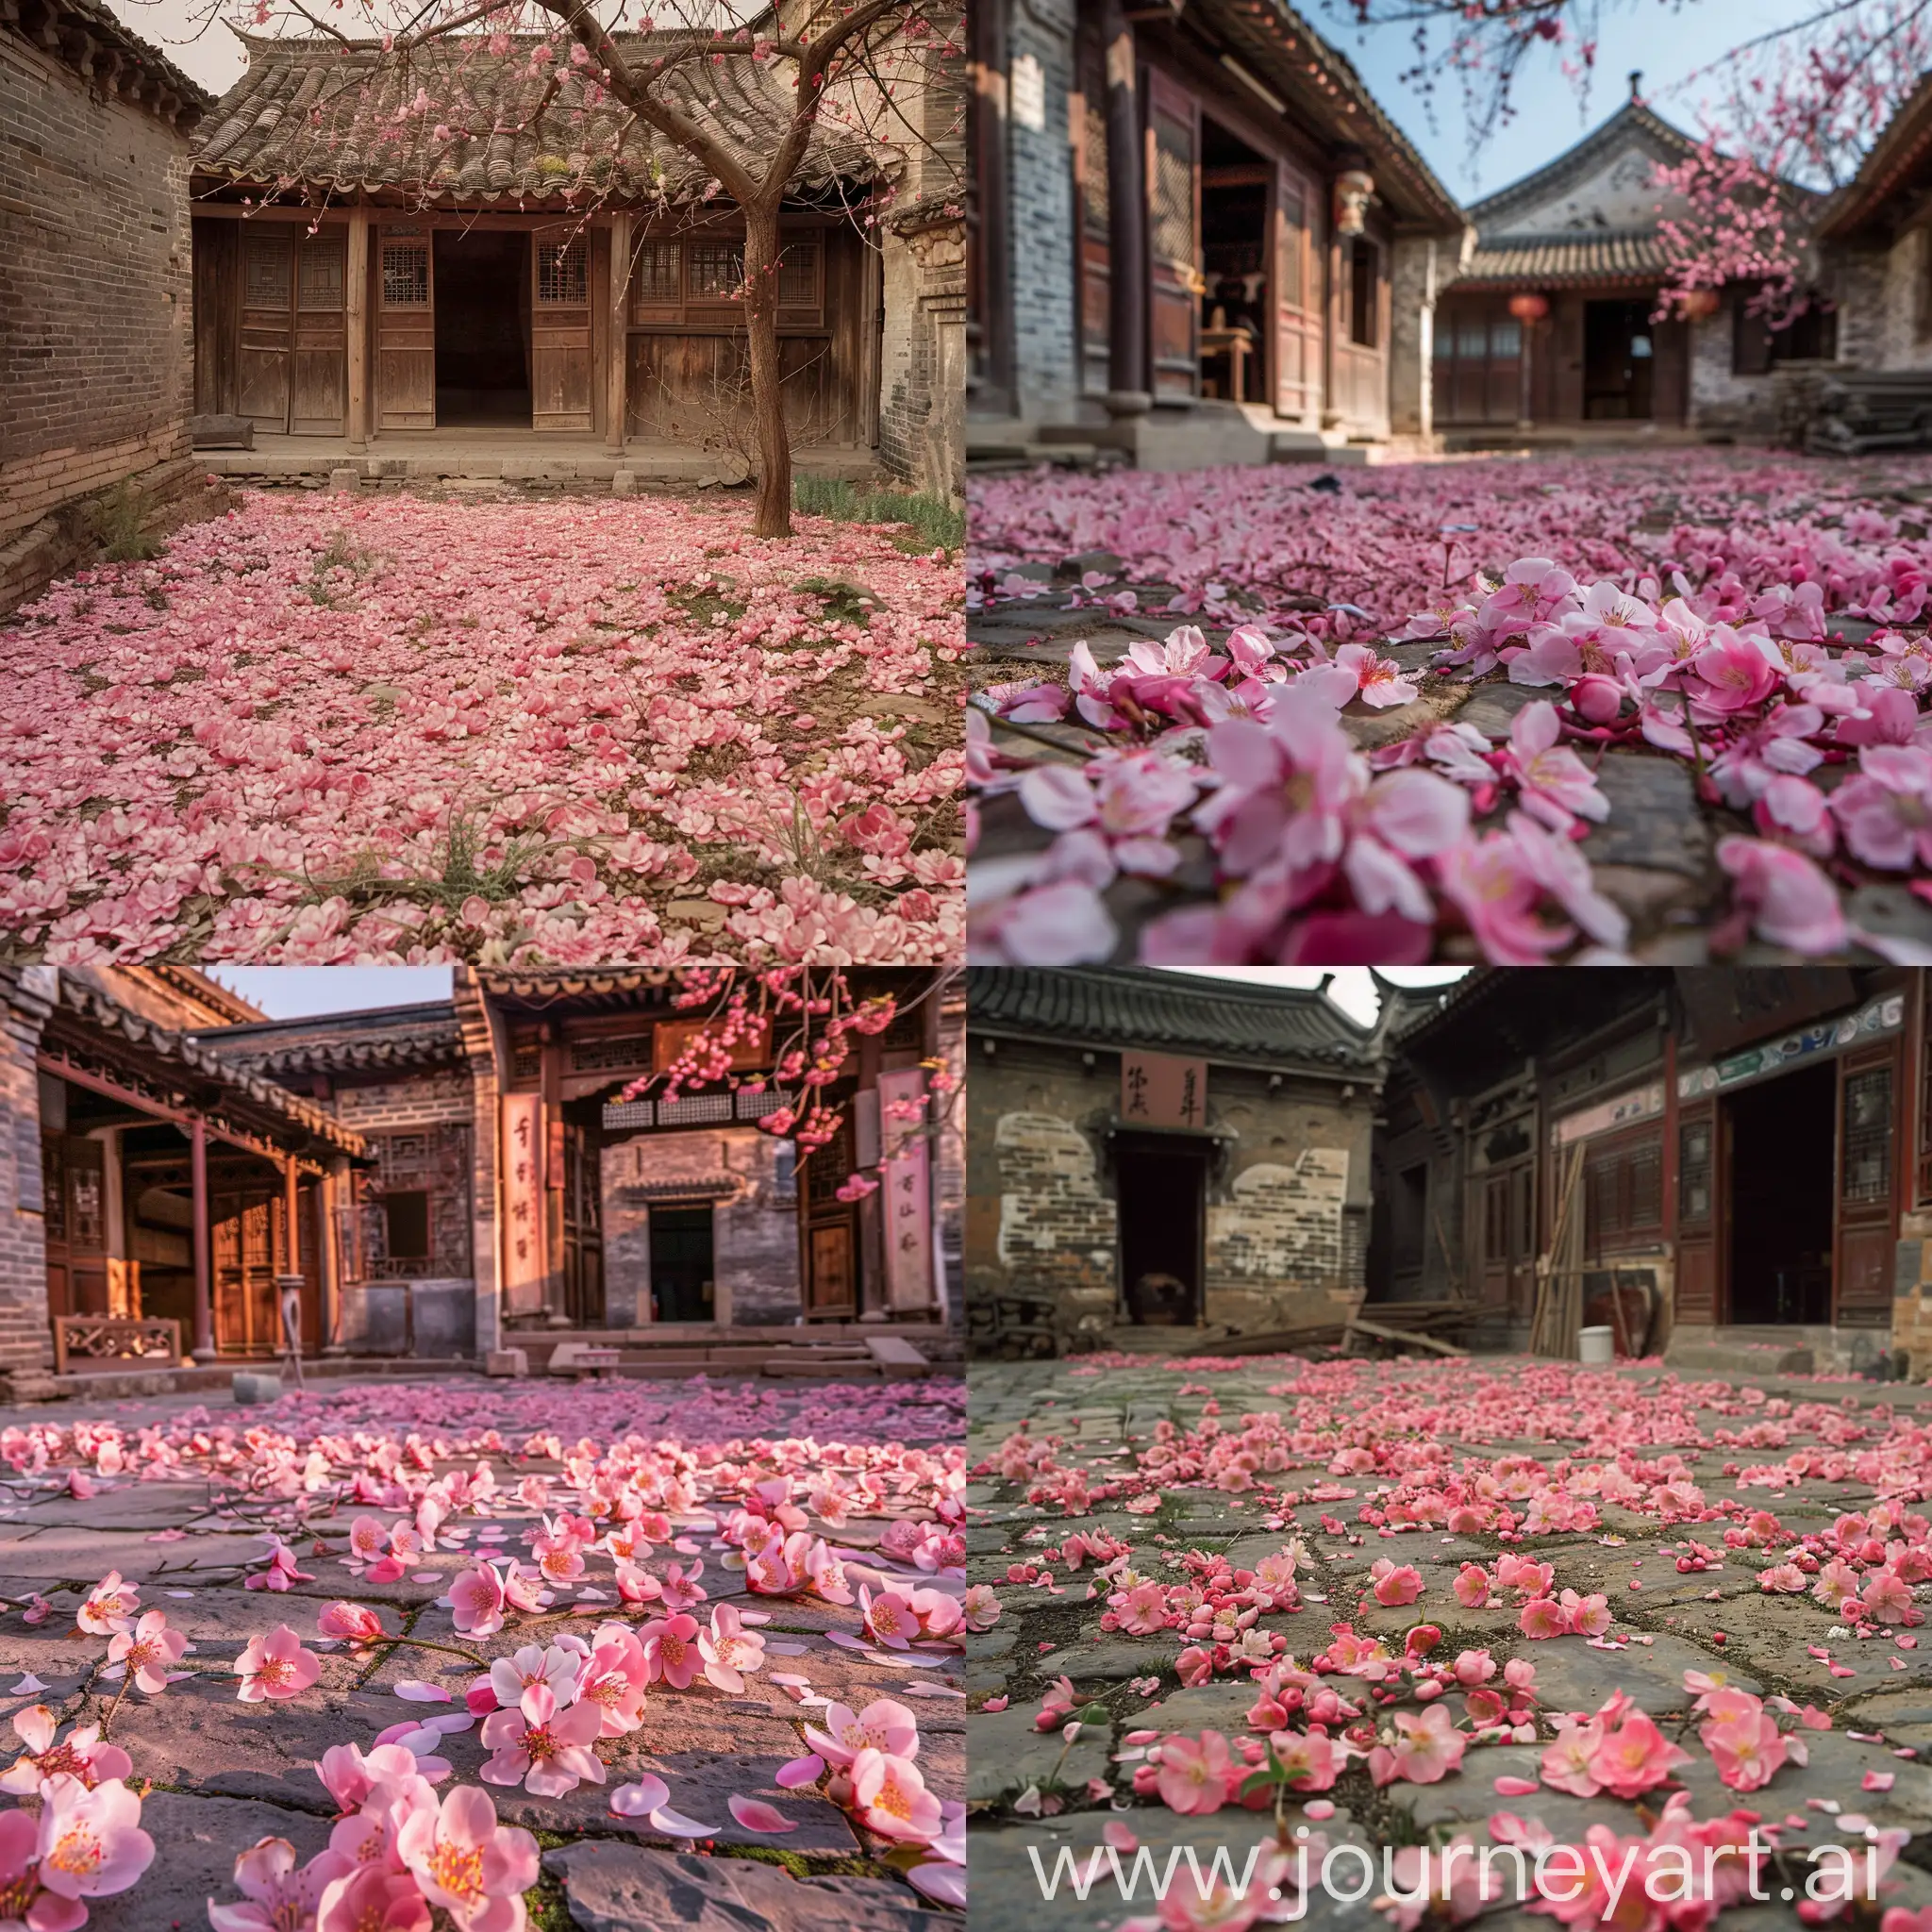 Peach-Blossom-Covered-Courtyard-in-Ancient-Changan-China